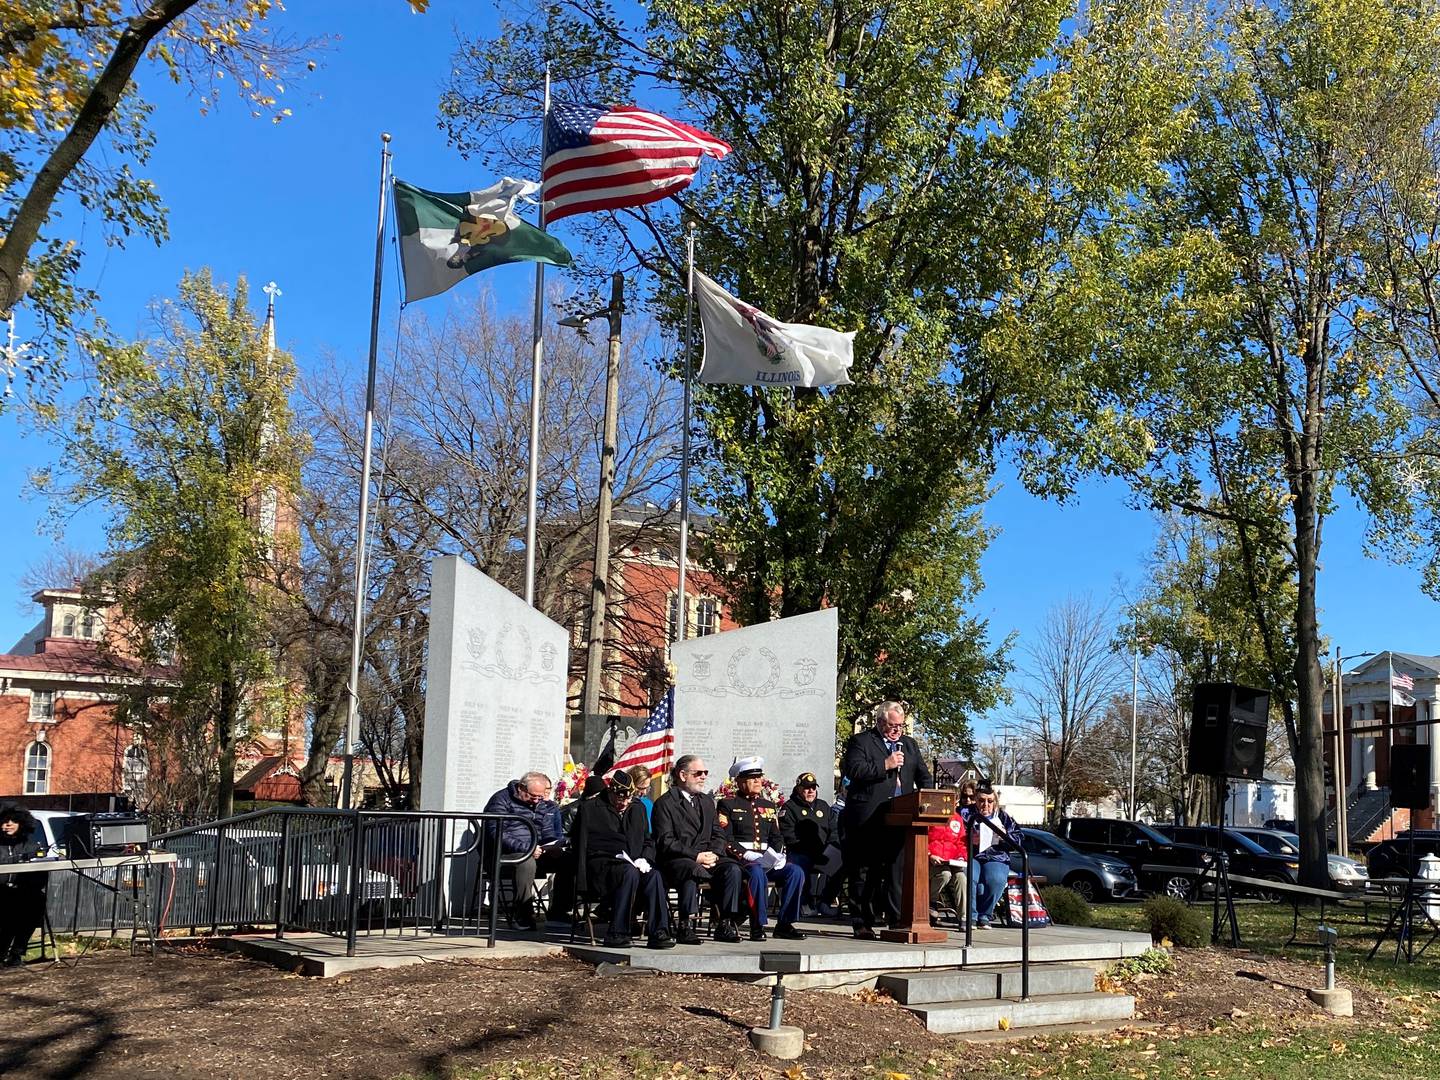 Mayor Dan Aussem addresses the crowd during the Veterans Day ceremony at Washington Square Park.